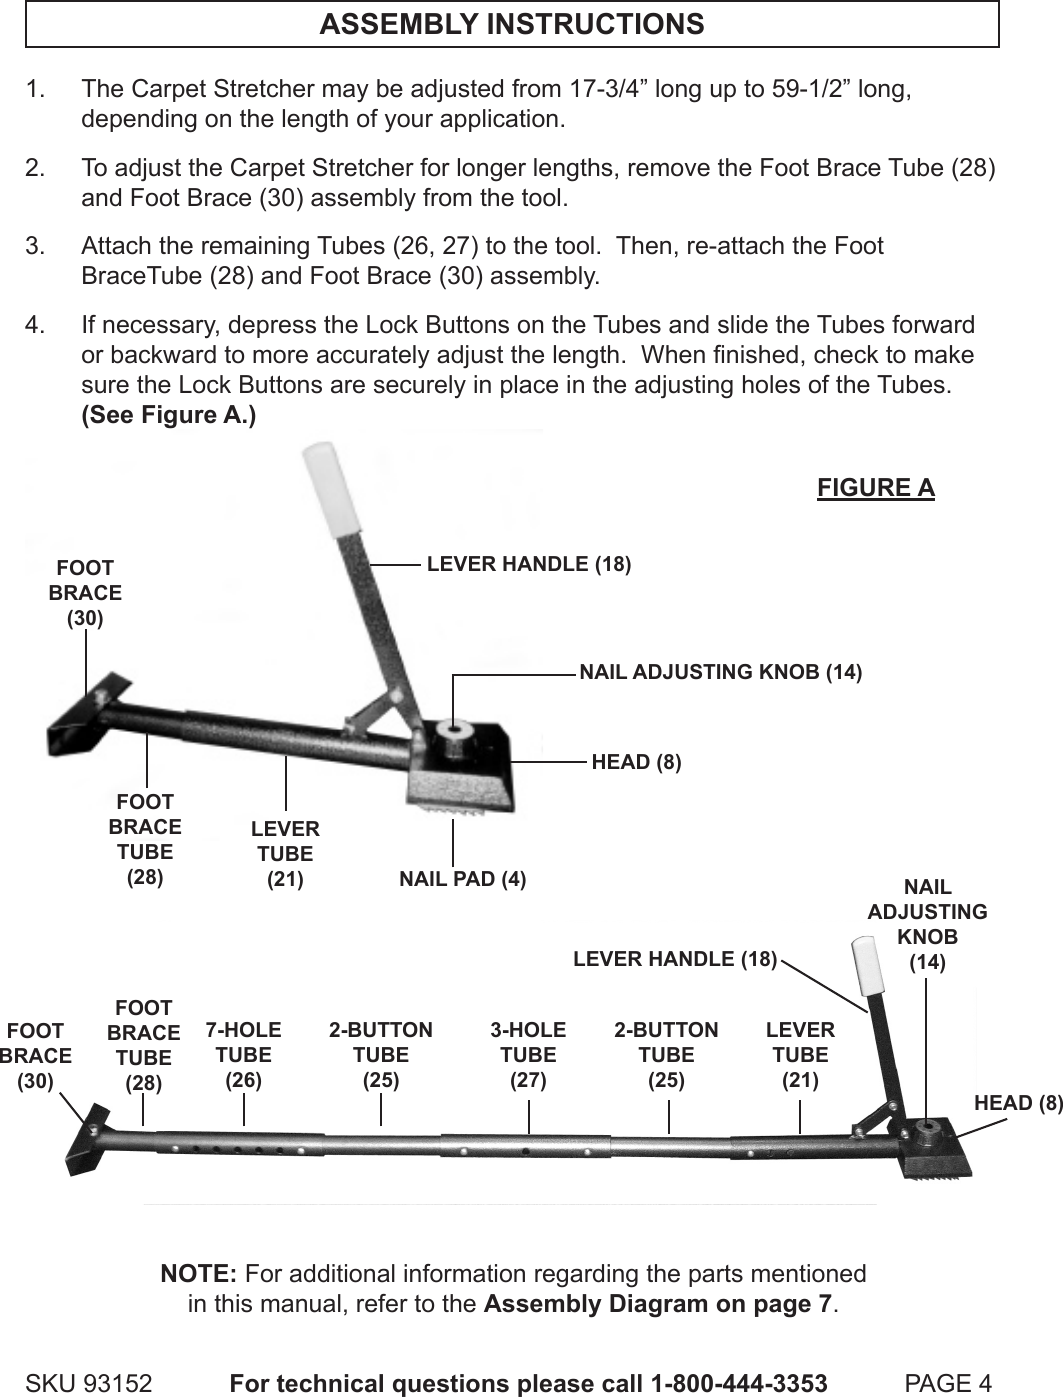 Page 4 of 7 - Harbor-Freight Harbor-Freight-93152-Owner-S-Manual